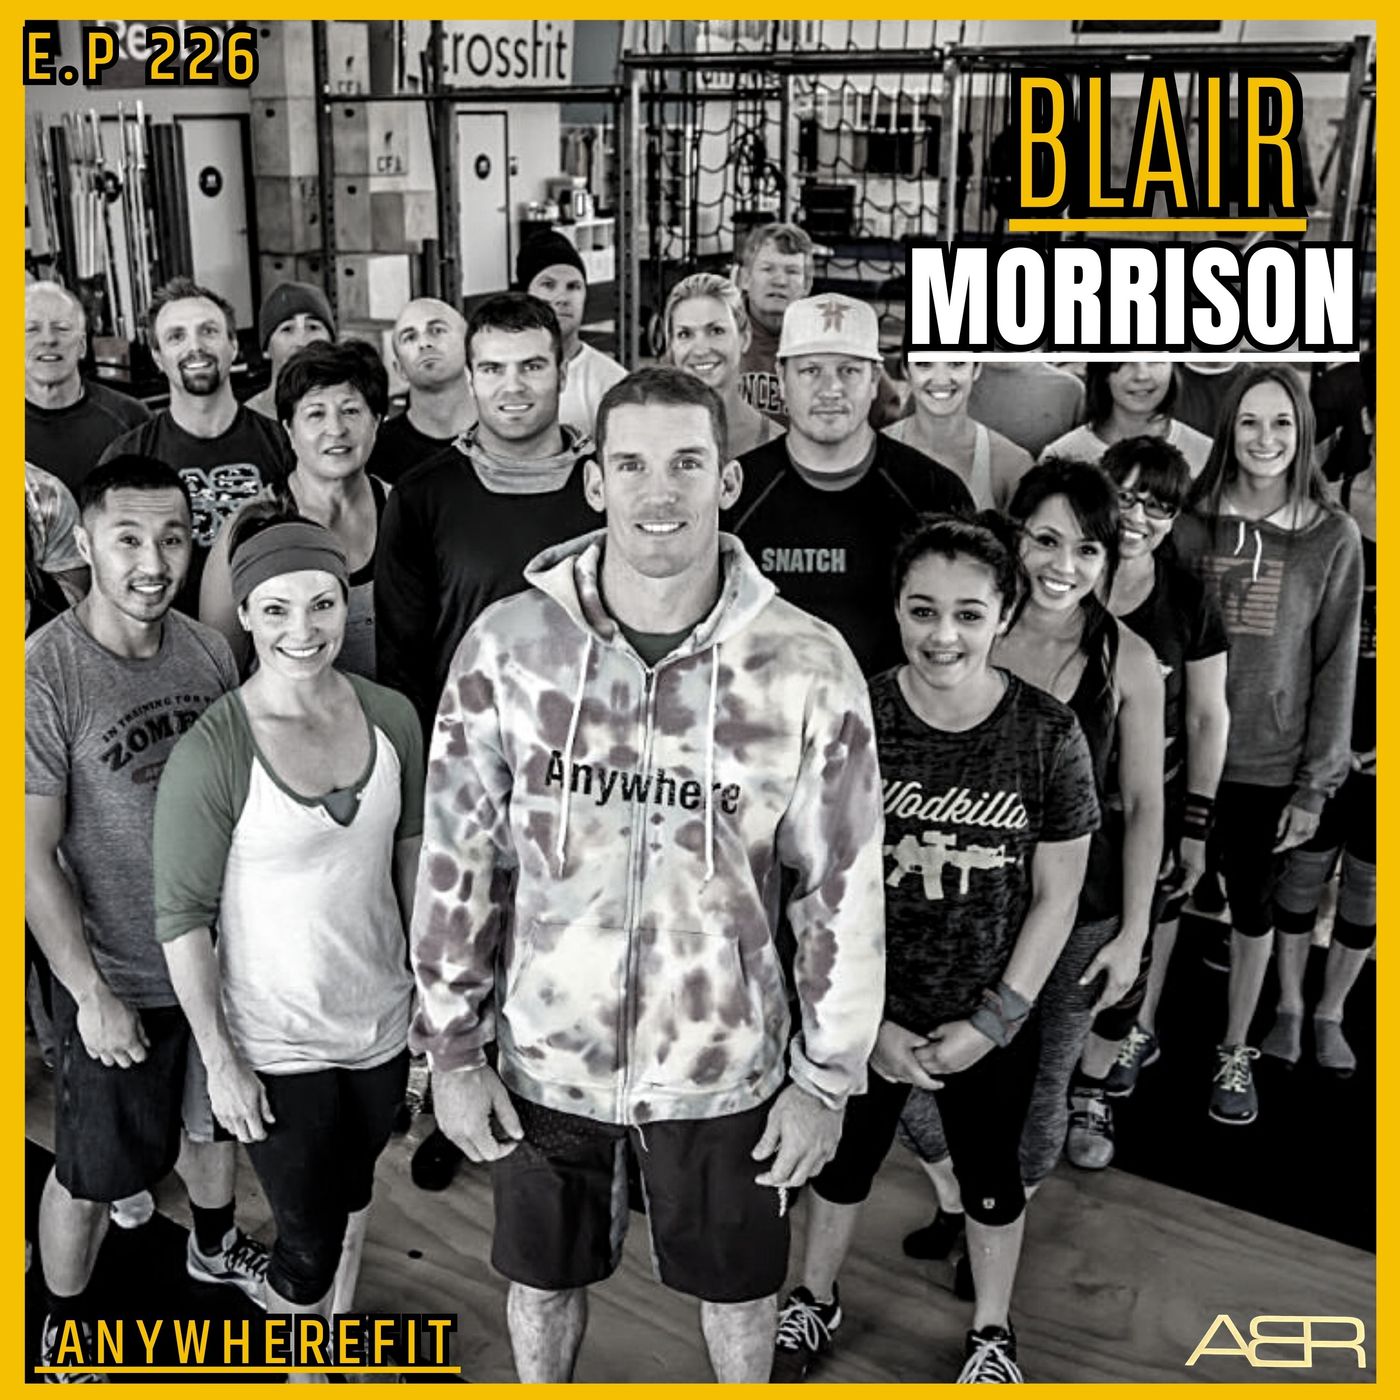 Airey Bros. Radio / Blair Morrison / Ep 226 / CrossFit Anywhere / Anywhere Fit / Physical Culture / Fitness Entrepreneur / CrossFit Affiliat